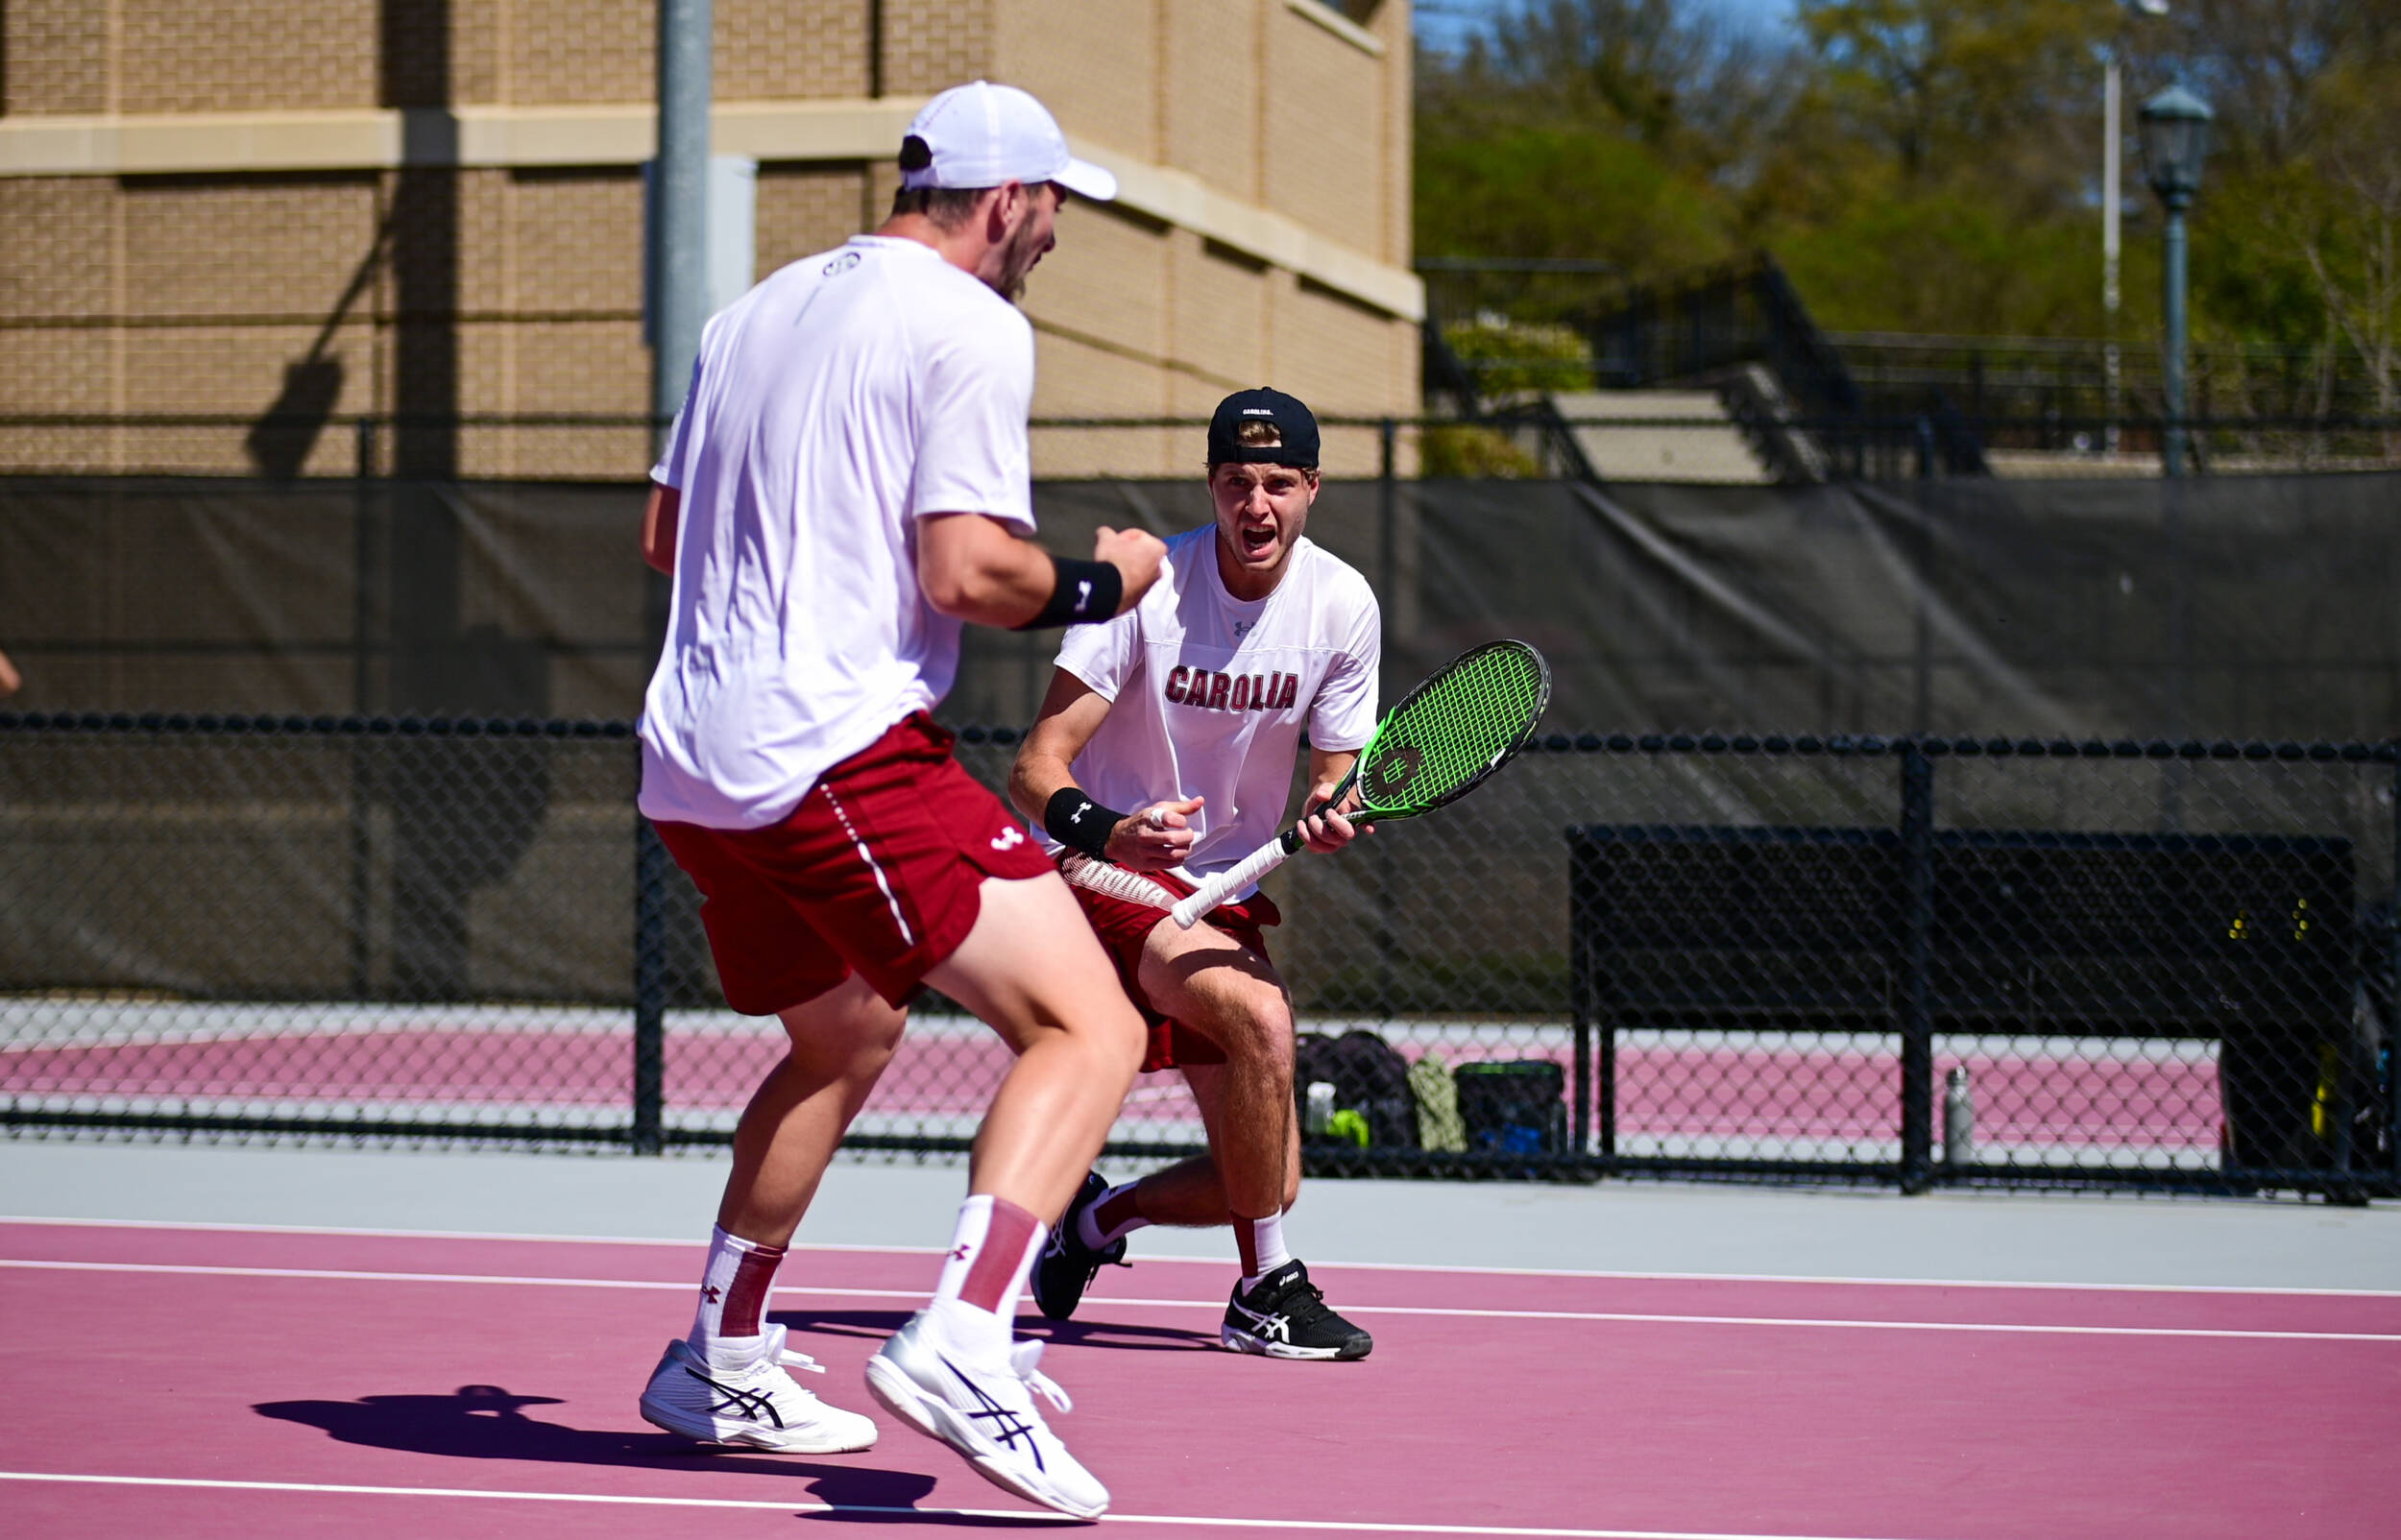 Samuel, Thomson Earn No. 1 Overall Seed in NCAA Doubles Tournament